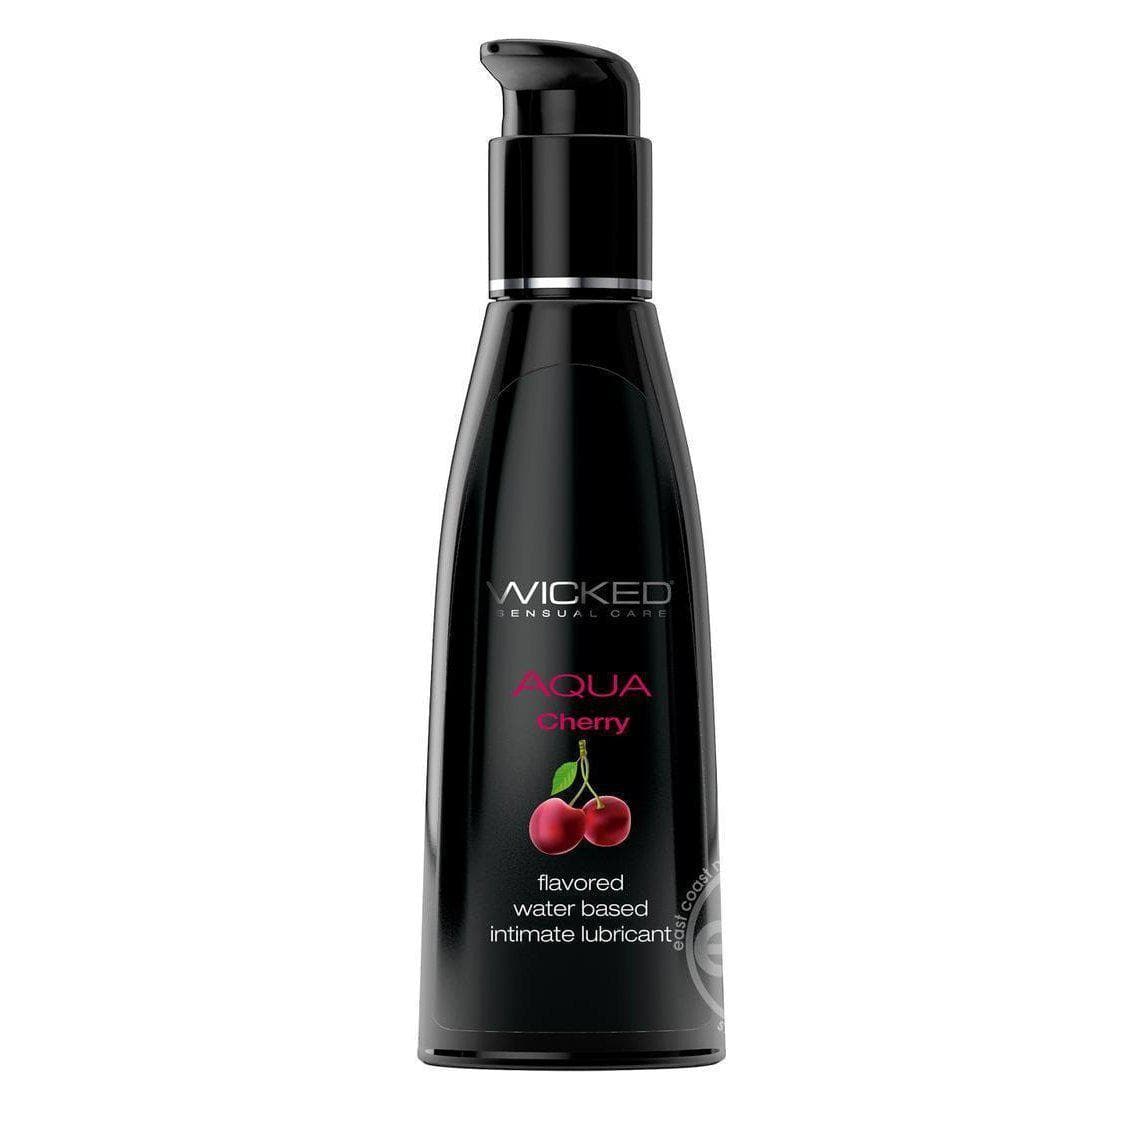 Wicked Aqua Water Based Flavored Intimate Lubricant Cherry - Romantic Blessings